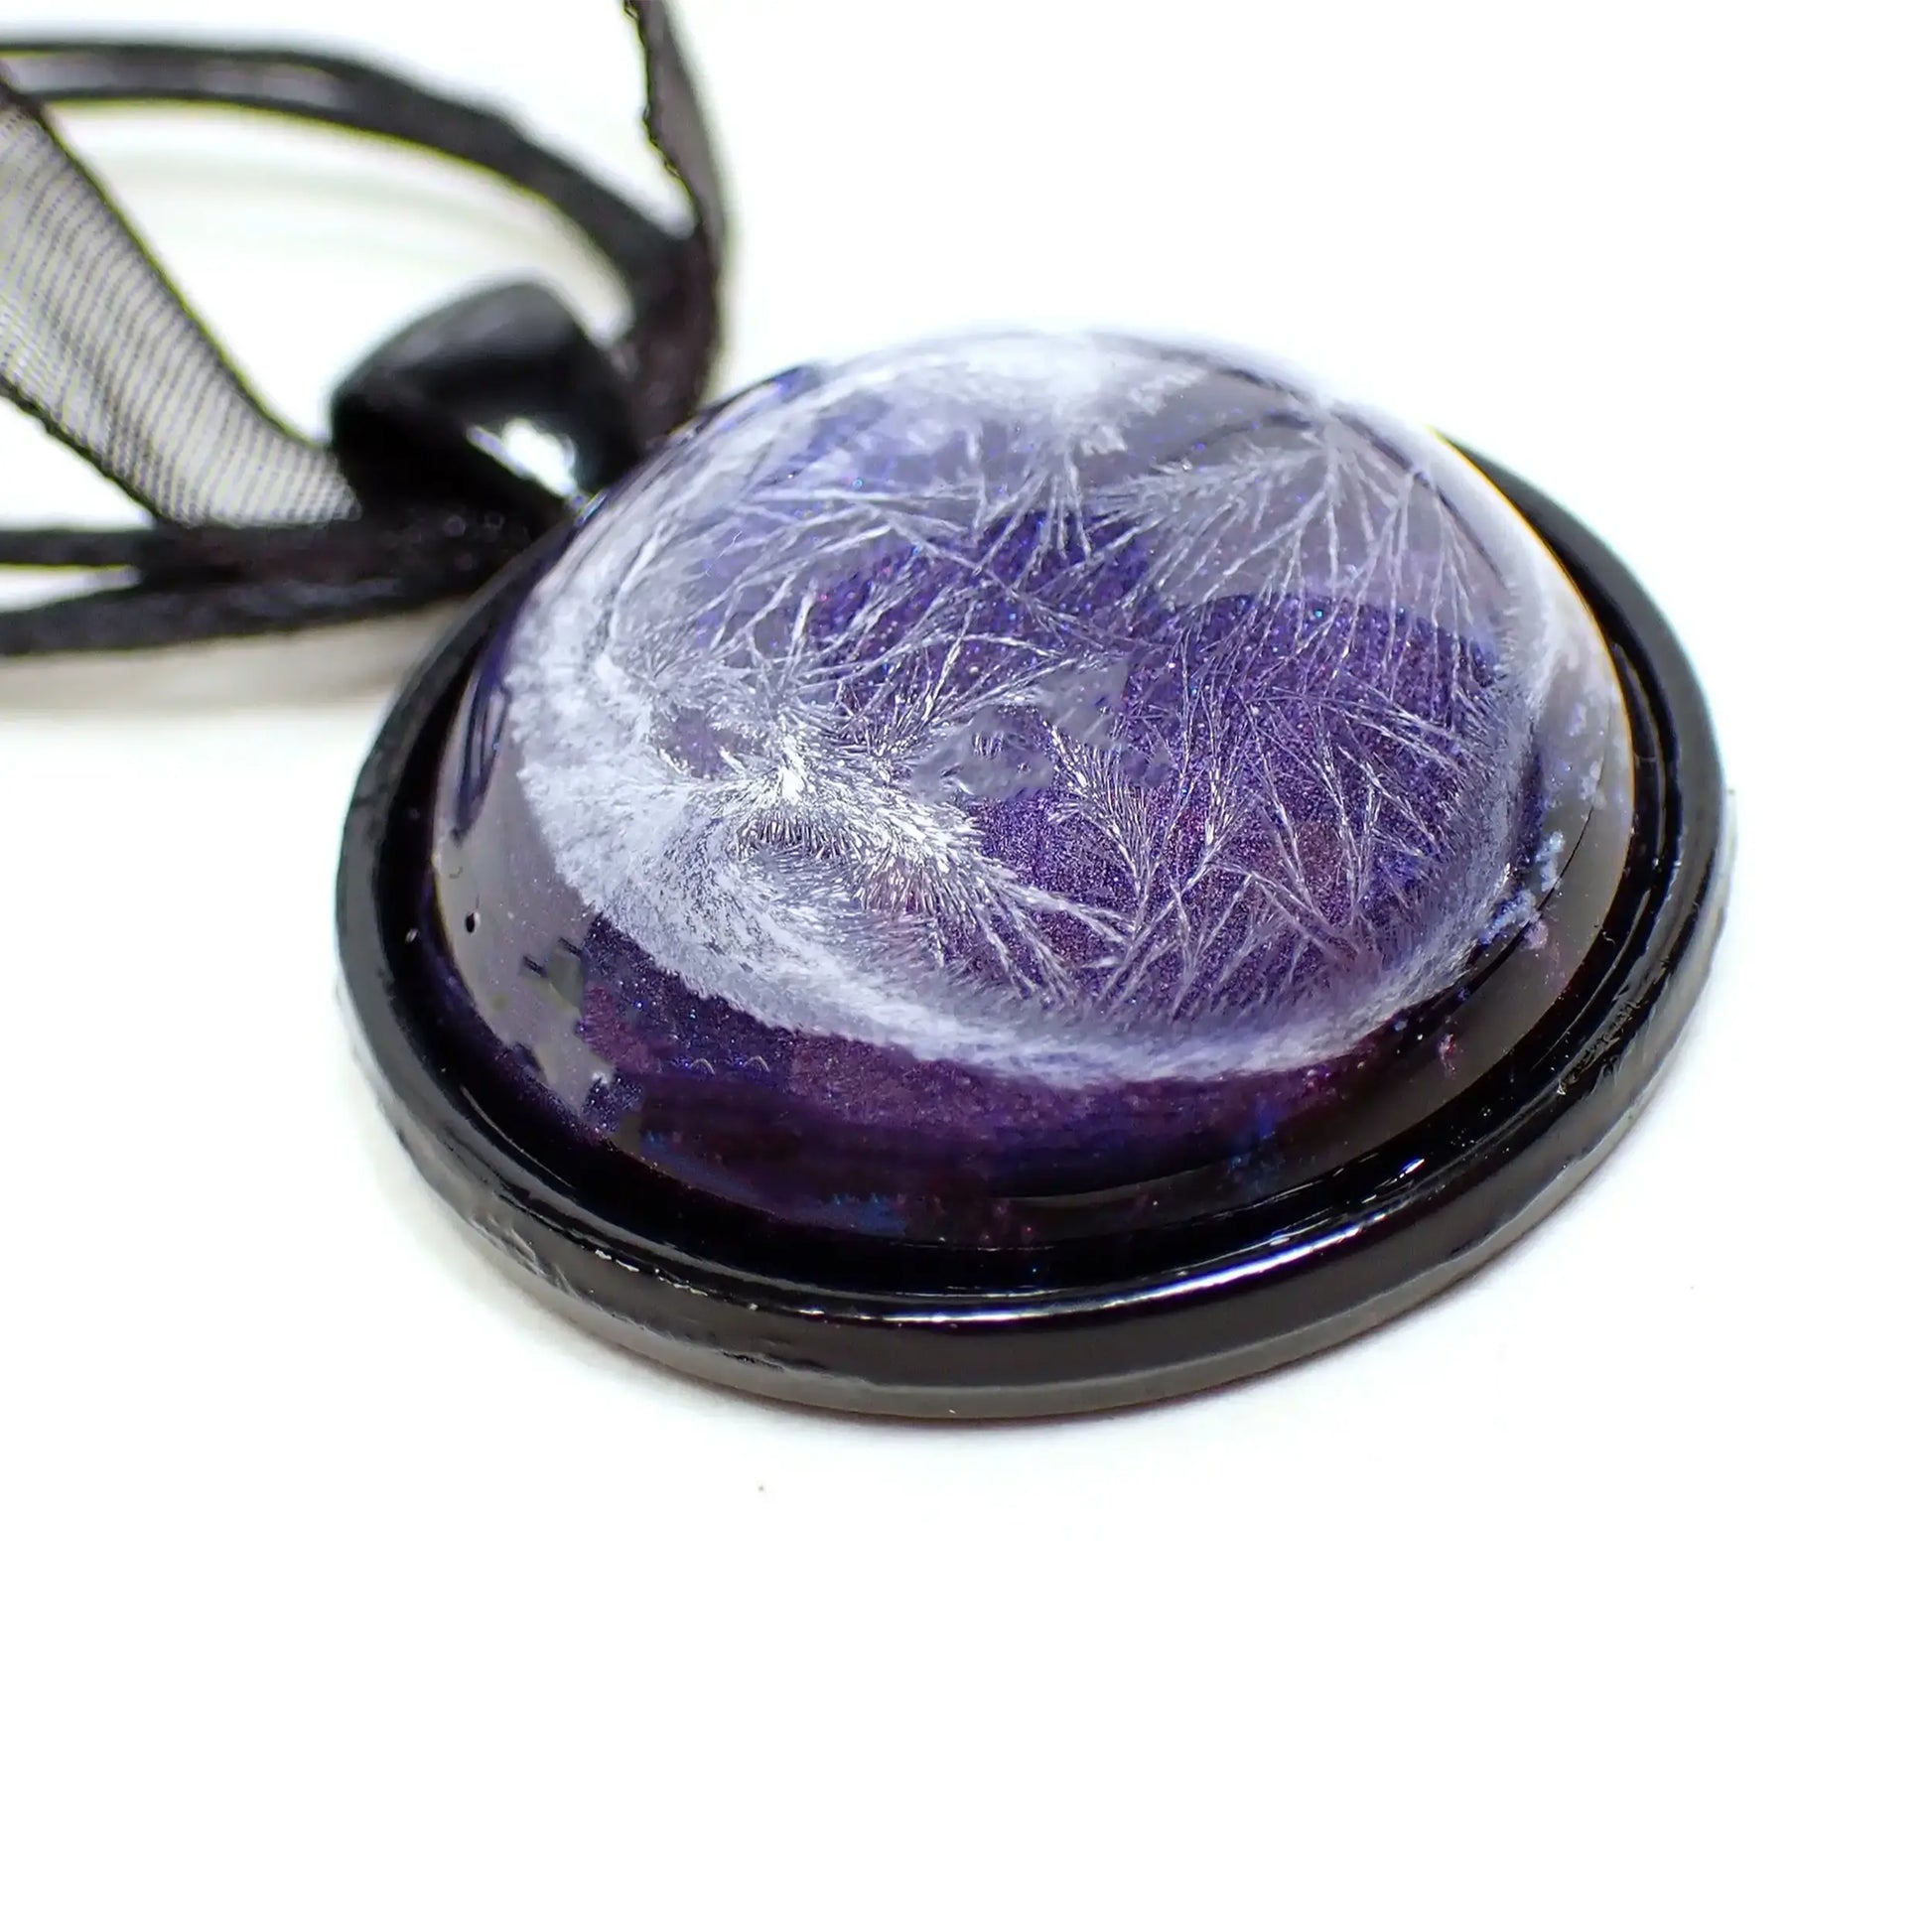 Enlarged view of the handmade resin pendant. The necklace part shows three black strands of faux leather cord and a strand of organza ribbon. There is a black coated round pendant with a domed resin cab. The resin has an iridescent purple background and an abstract crystalline like frost design in white through it.